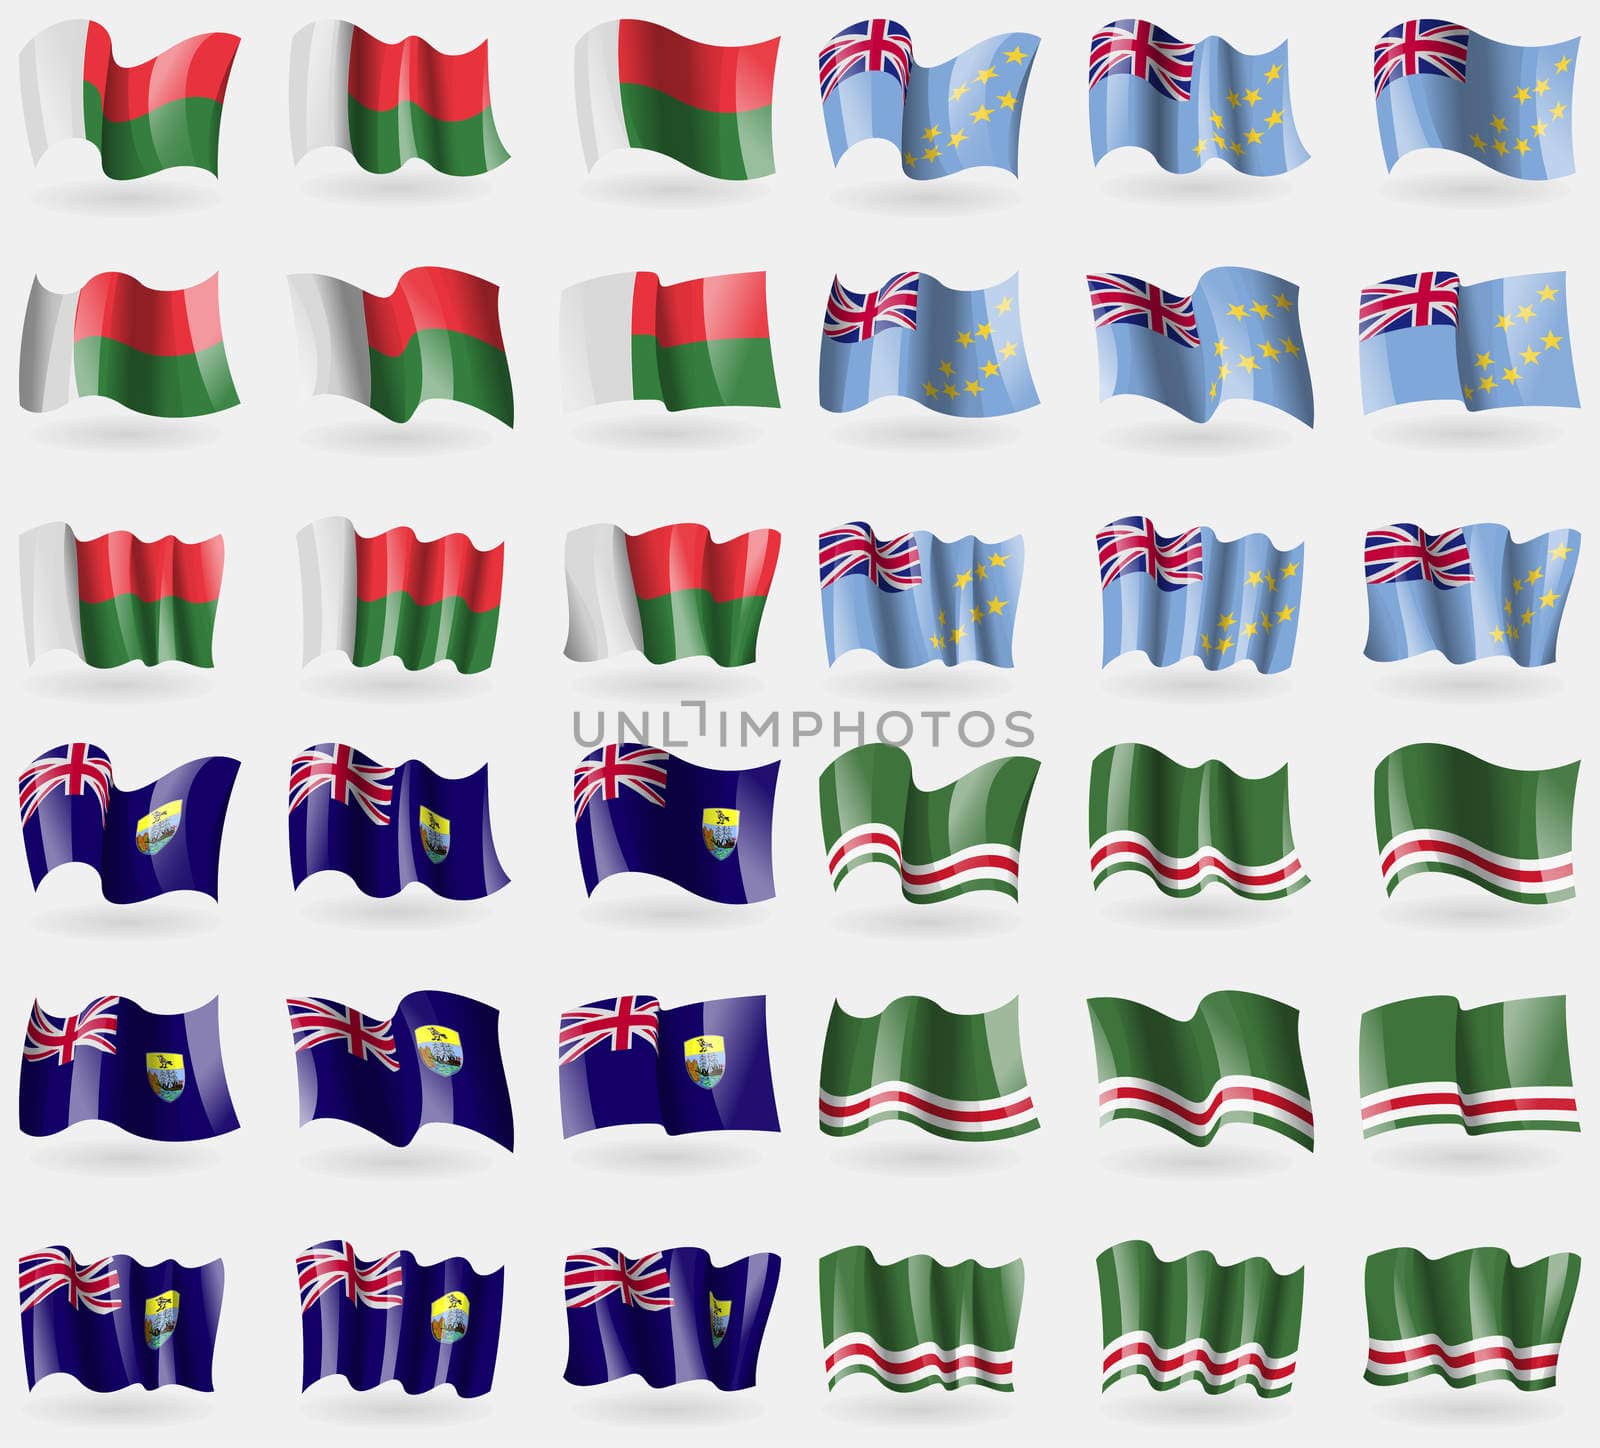 Madagascar, Tuvalu, Saint Helena, Chechen Republic of Ichkeria. Set of 36 flags of the countries of the world.  by serhii_lohvyniuk